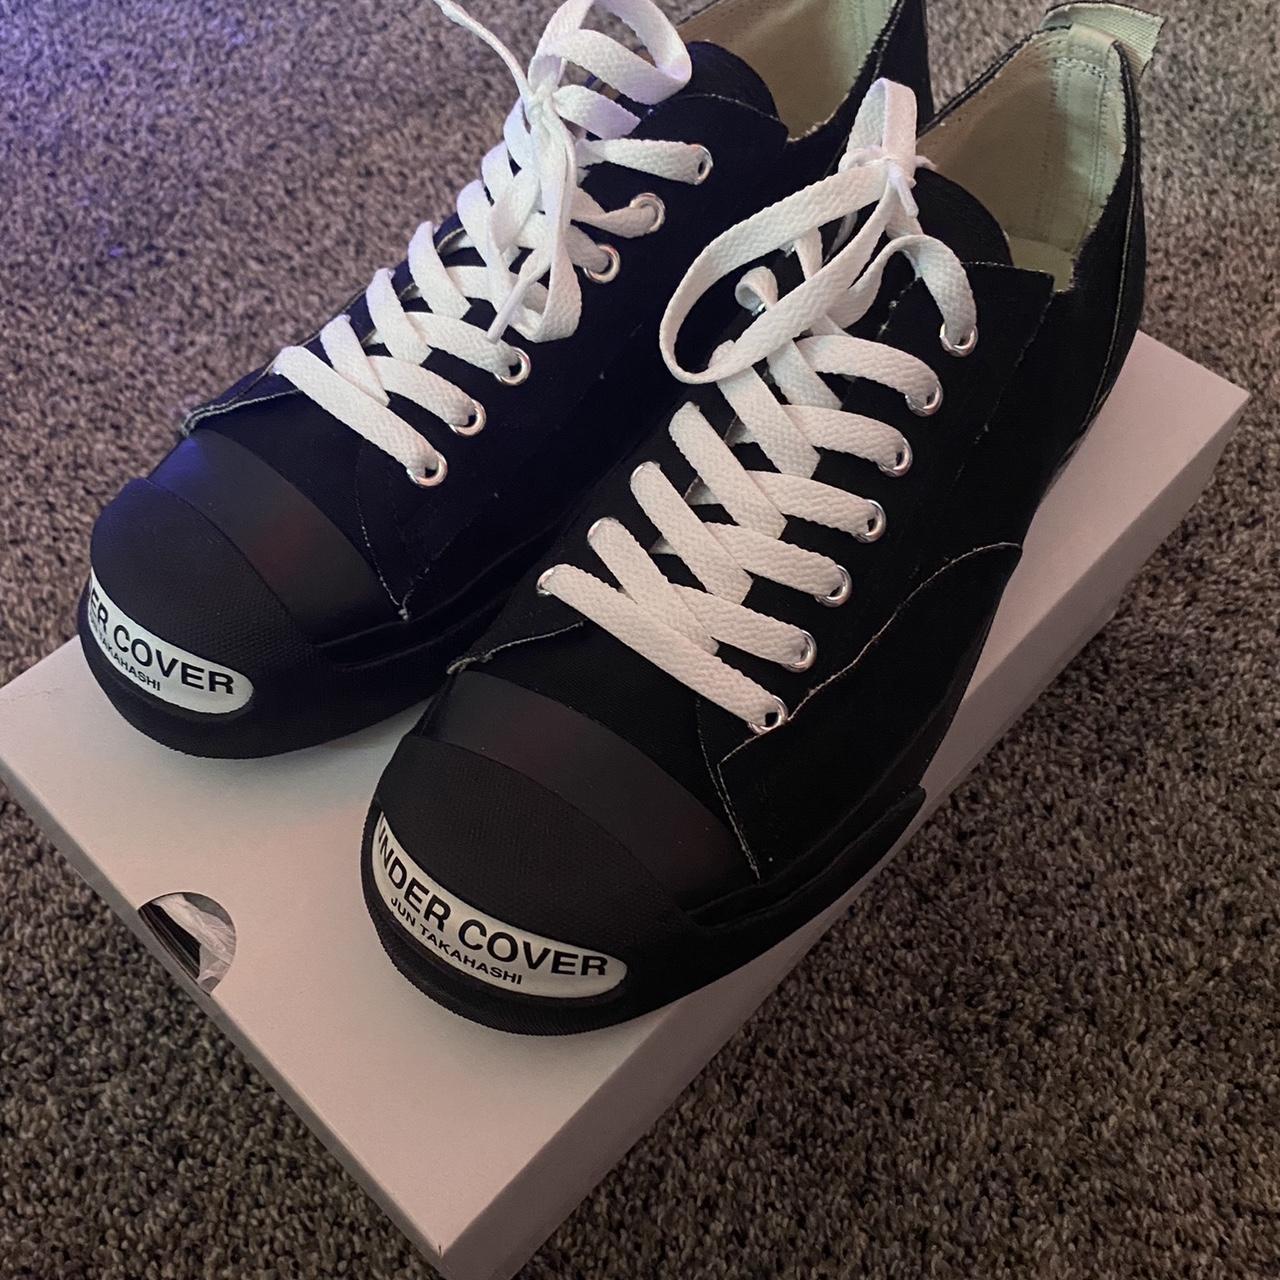 Undercover Jack Purcell Shoes Never worn... - Depop